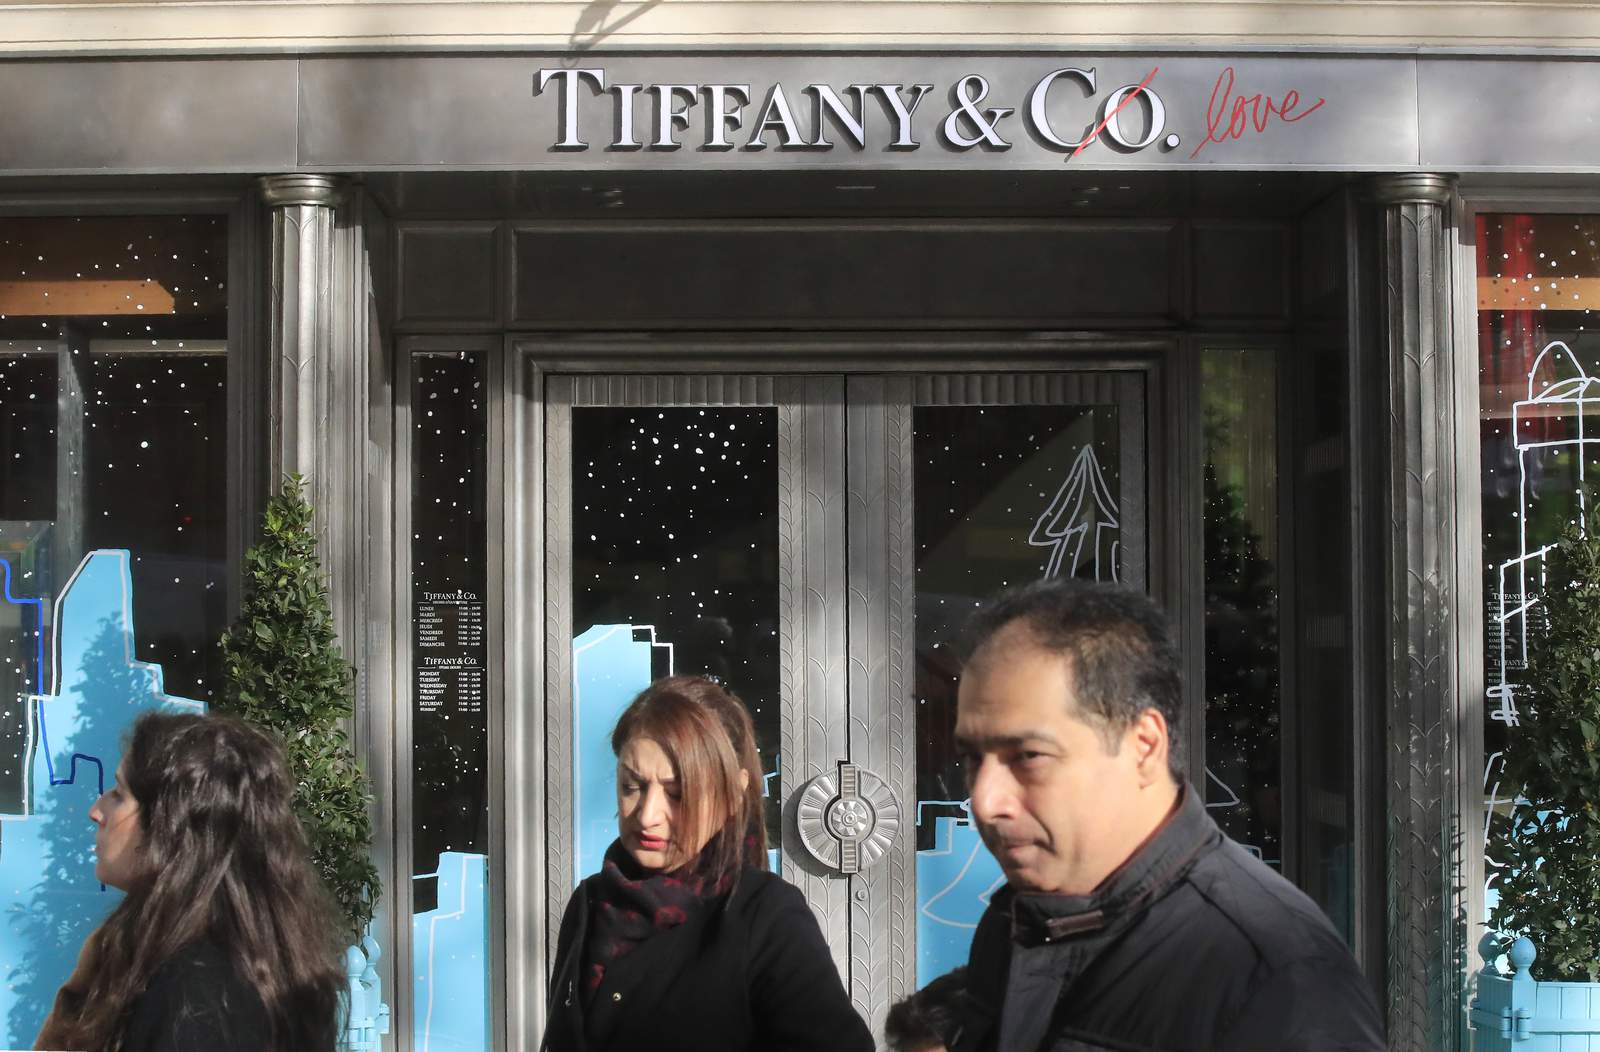 Largest luxury deal back on, Tiffany agrees to lower price